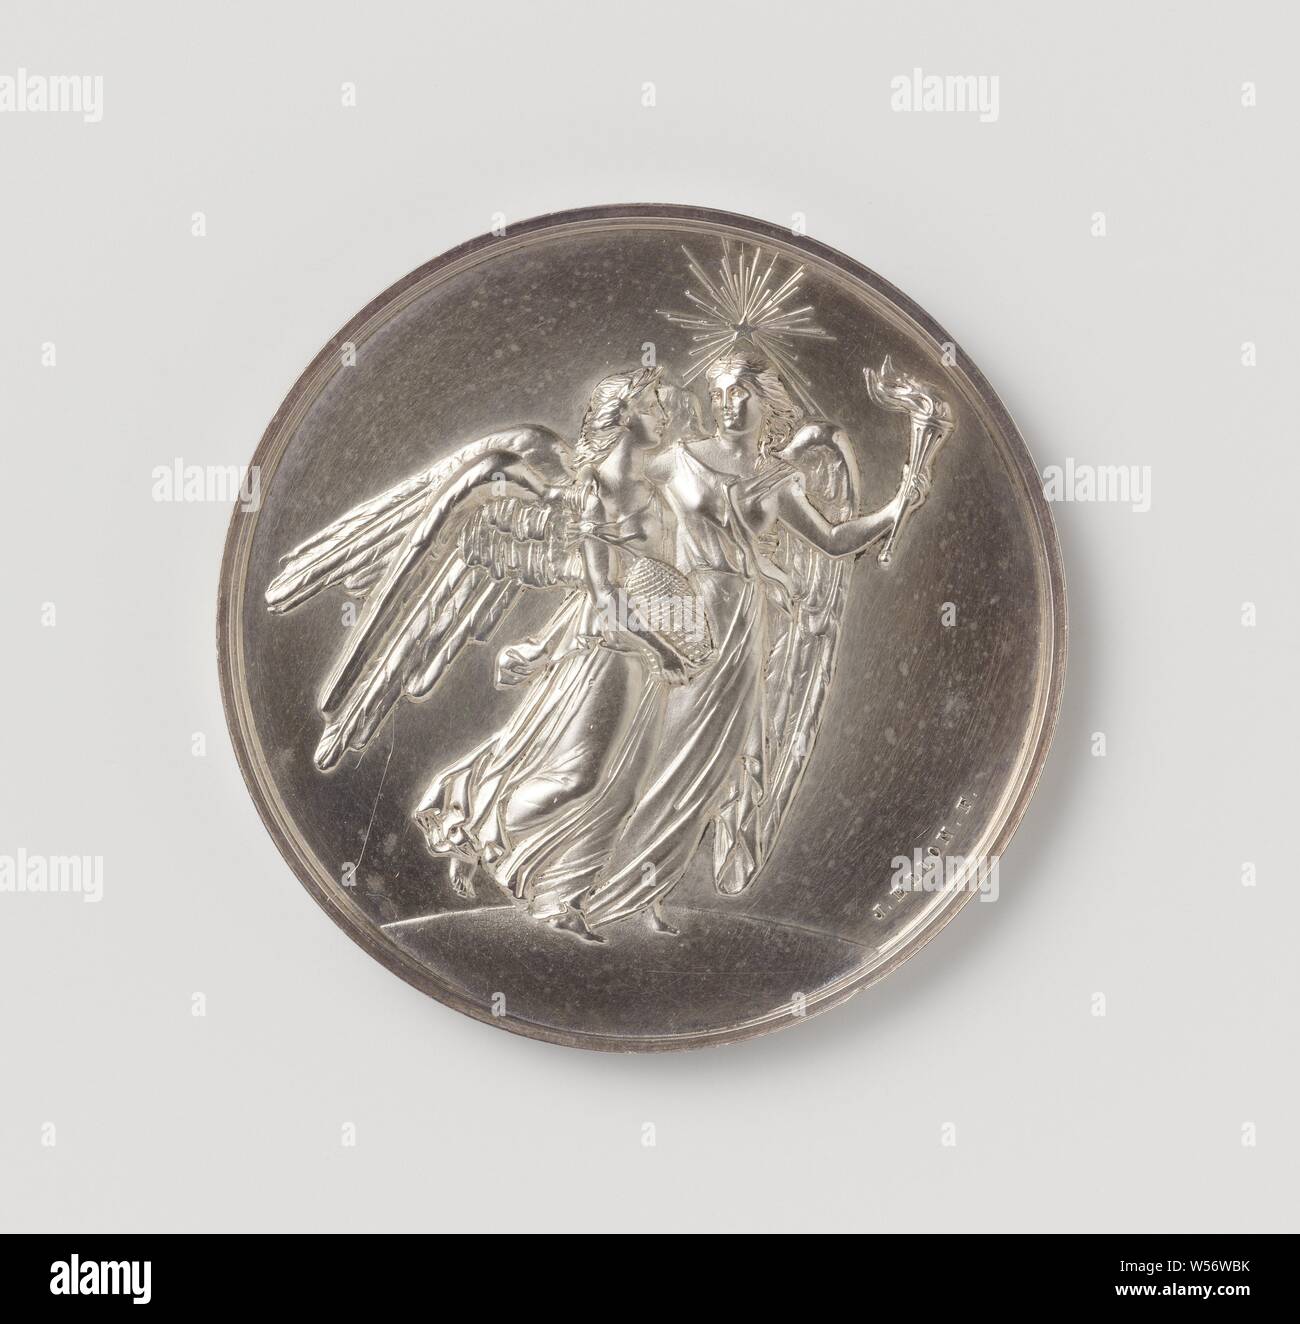 Medal, Silver Medal. Obverse: winged woman with shining star above her head and torch in left hand, representing Art, leading woman with beehive in right hand, representing Industry. Reverse: inscription within laurel wreath and inscription, Kantschrift, Volksvlijt Palace, Department of the Navy, Jacob Samuel Cohen Elion (signed by artist), Amsterdam, 1866, silver (metal), striking (metalworking), d 5.5 cm × w 68.68 Stock Photo